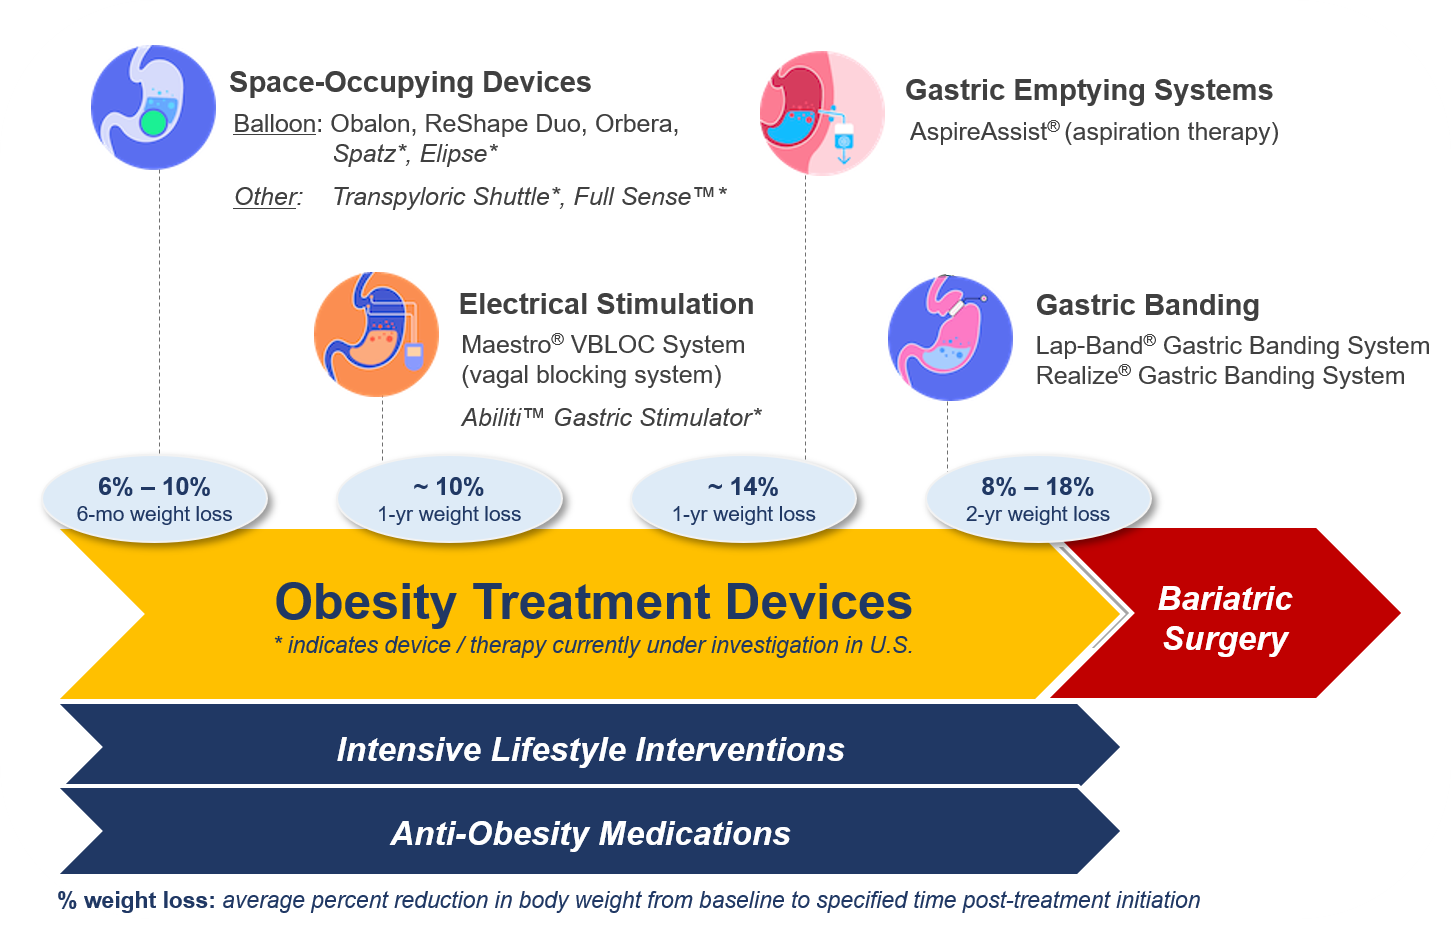 Review of Obesity of Treatment Devices infographic